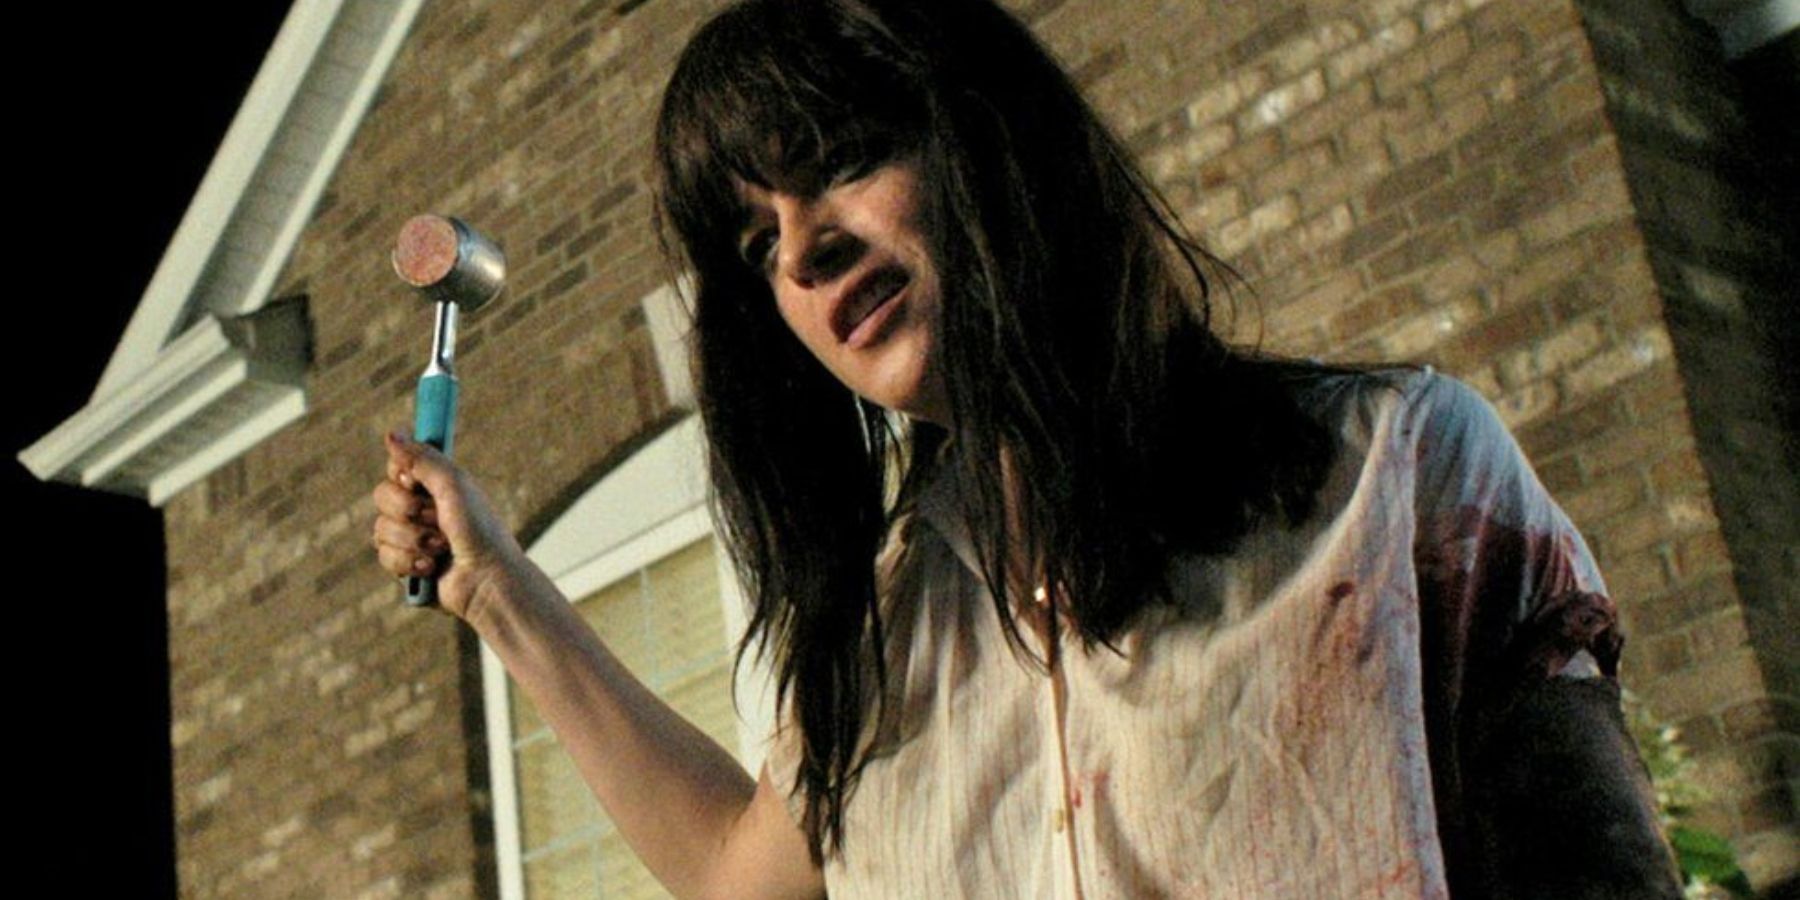 Selma Blair as Kendall holding up a hammer in Mom And Dad